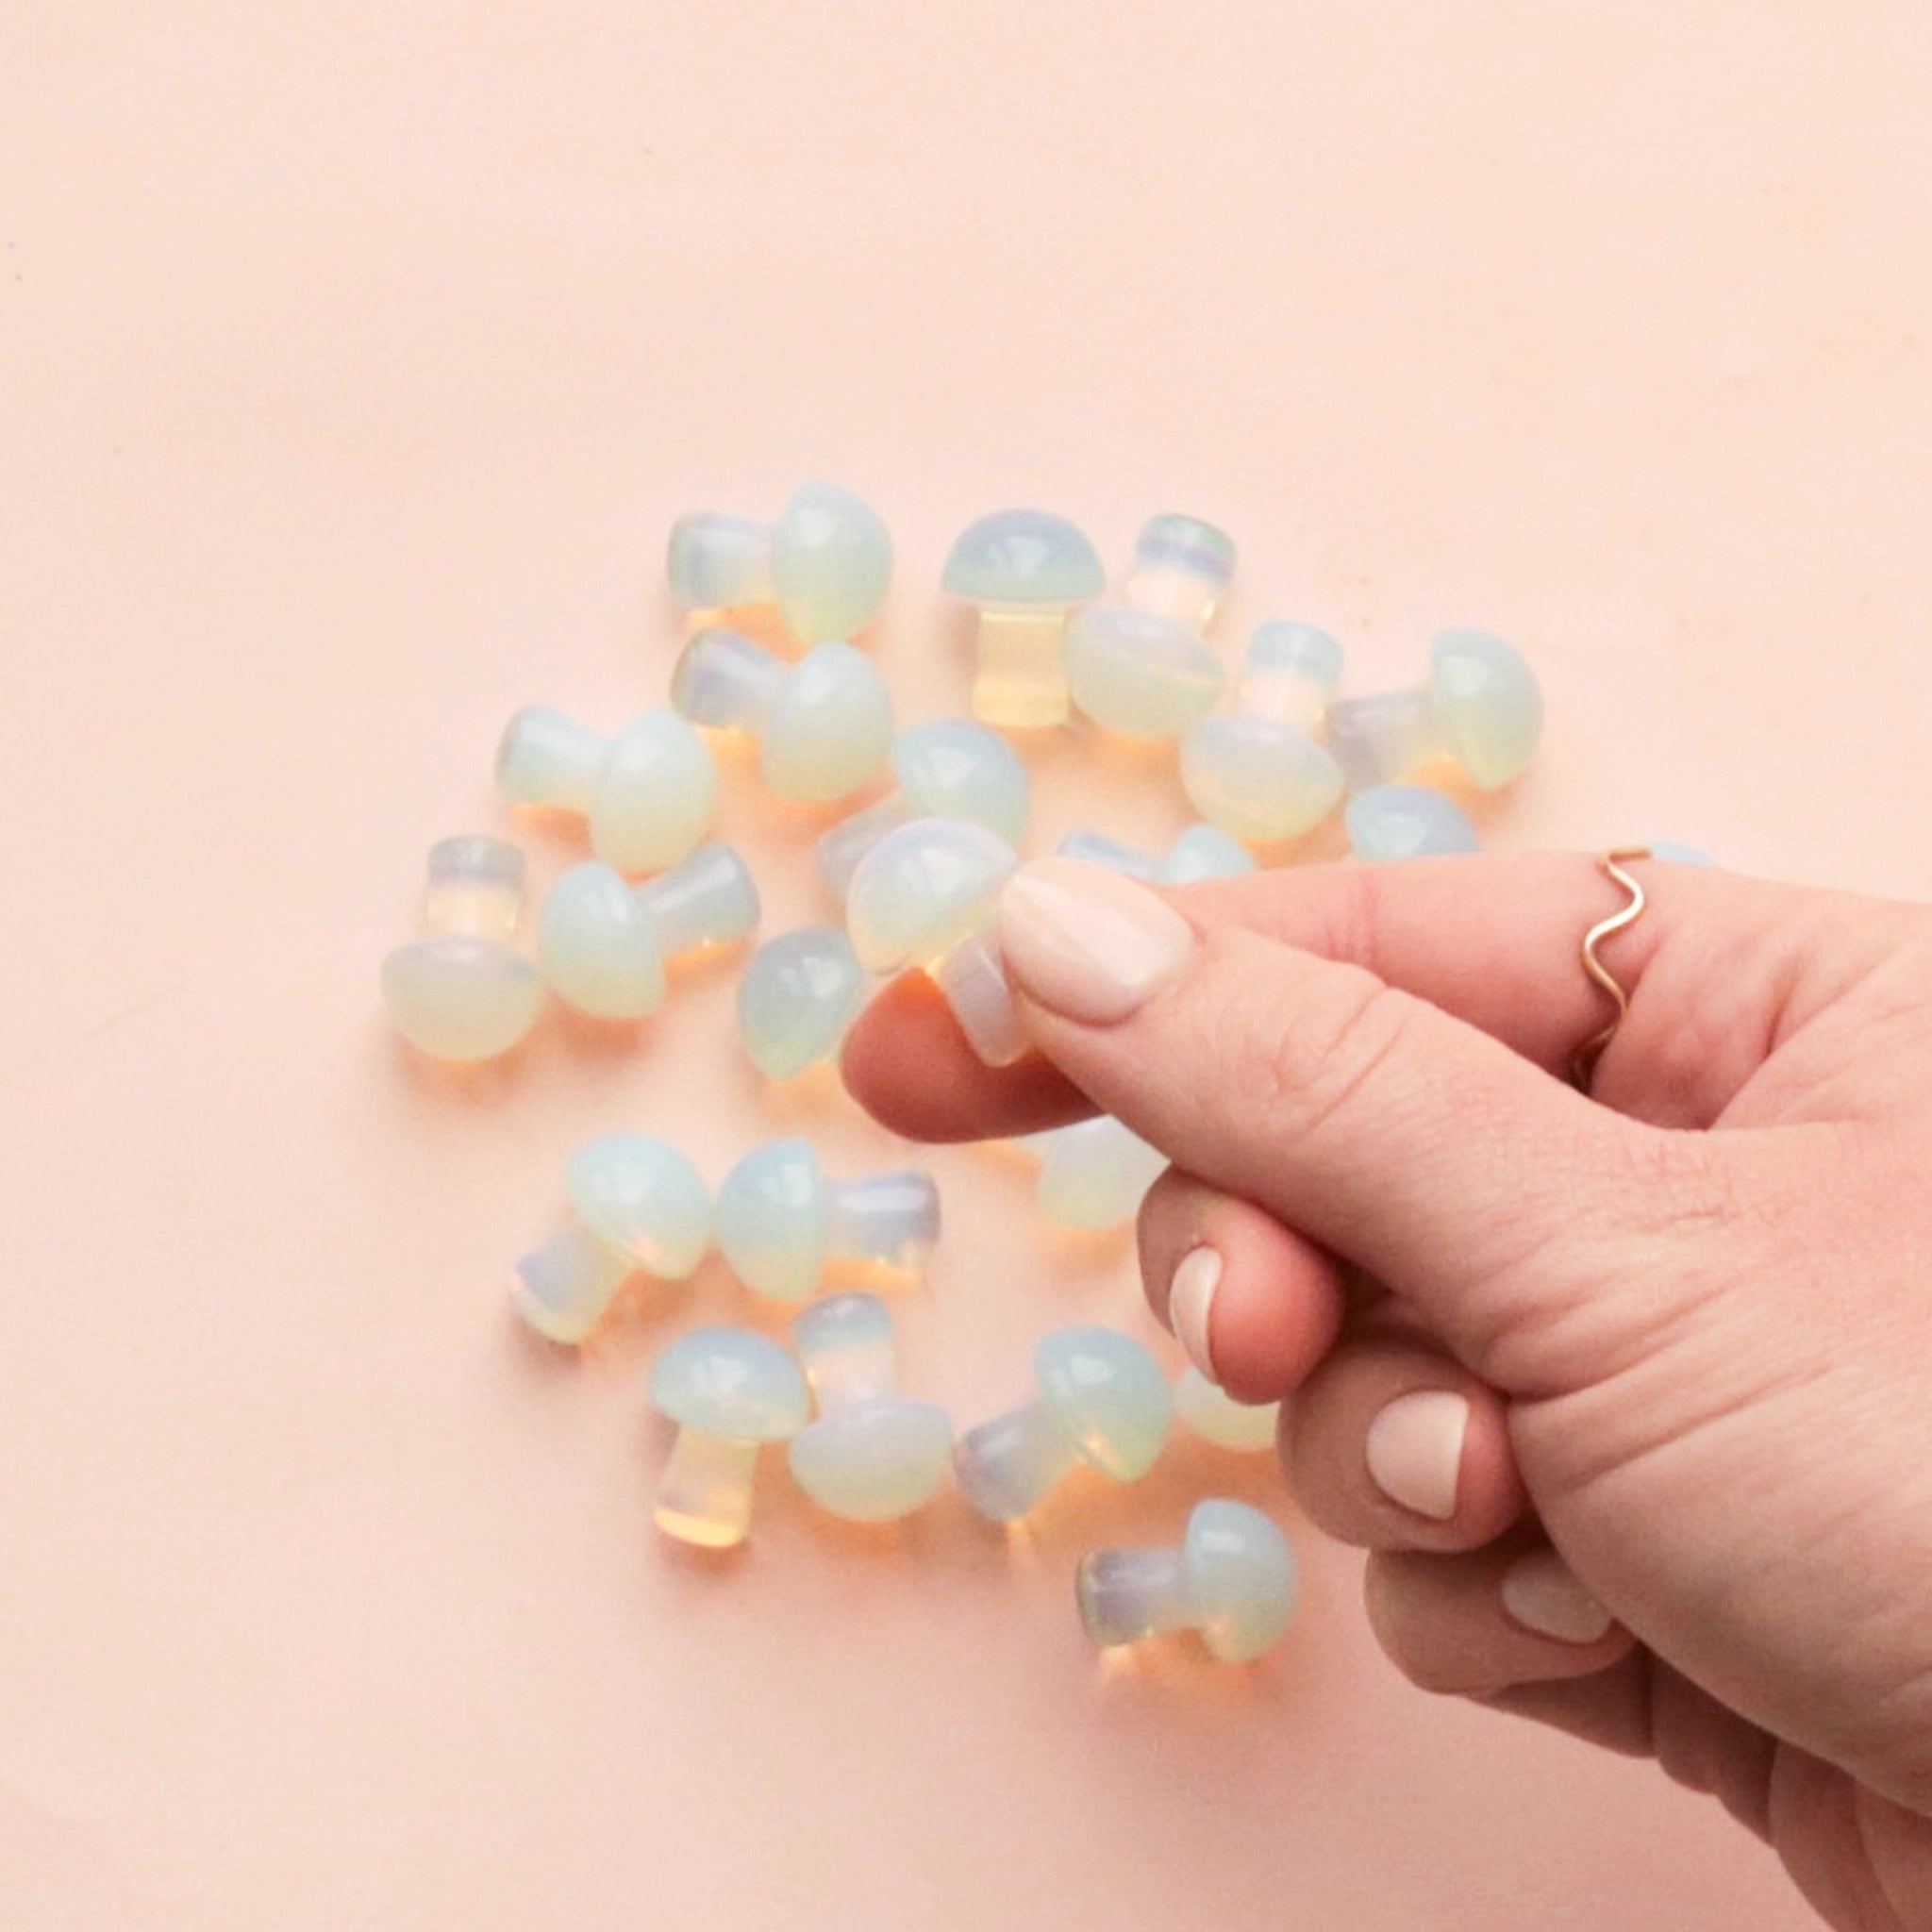 A handful of the tiny mushroom shaped Opal stones on a pink background.